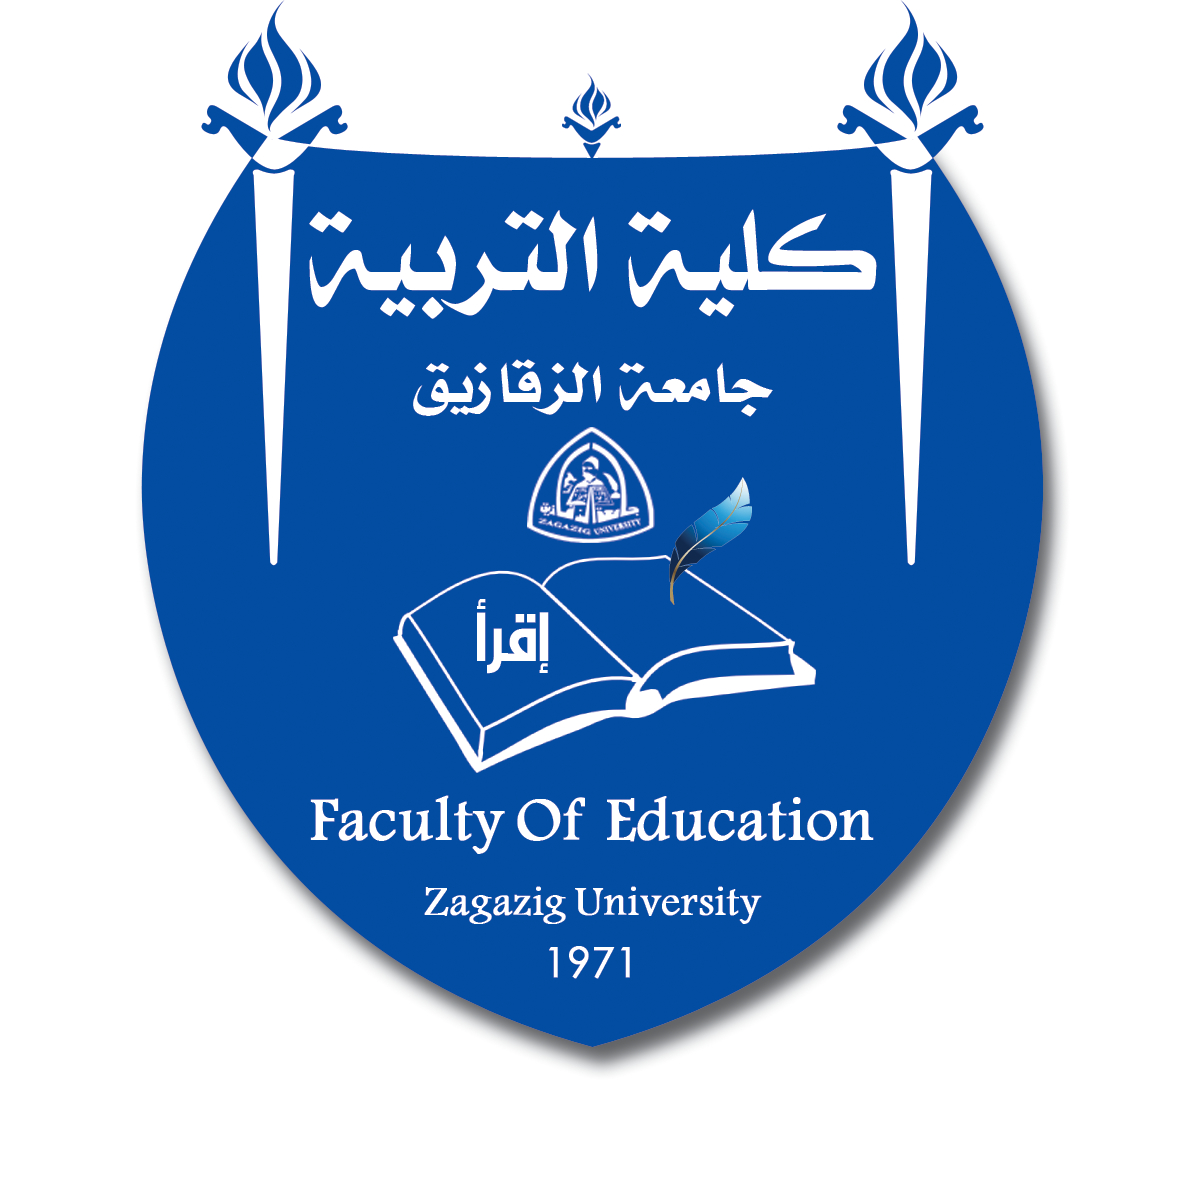 The conference of the faculty of Education at the University of Kuwait